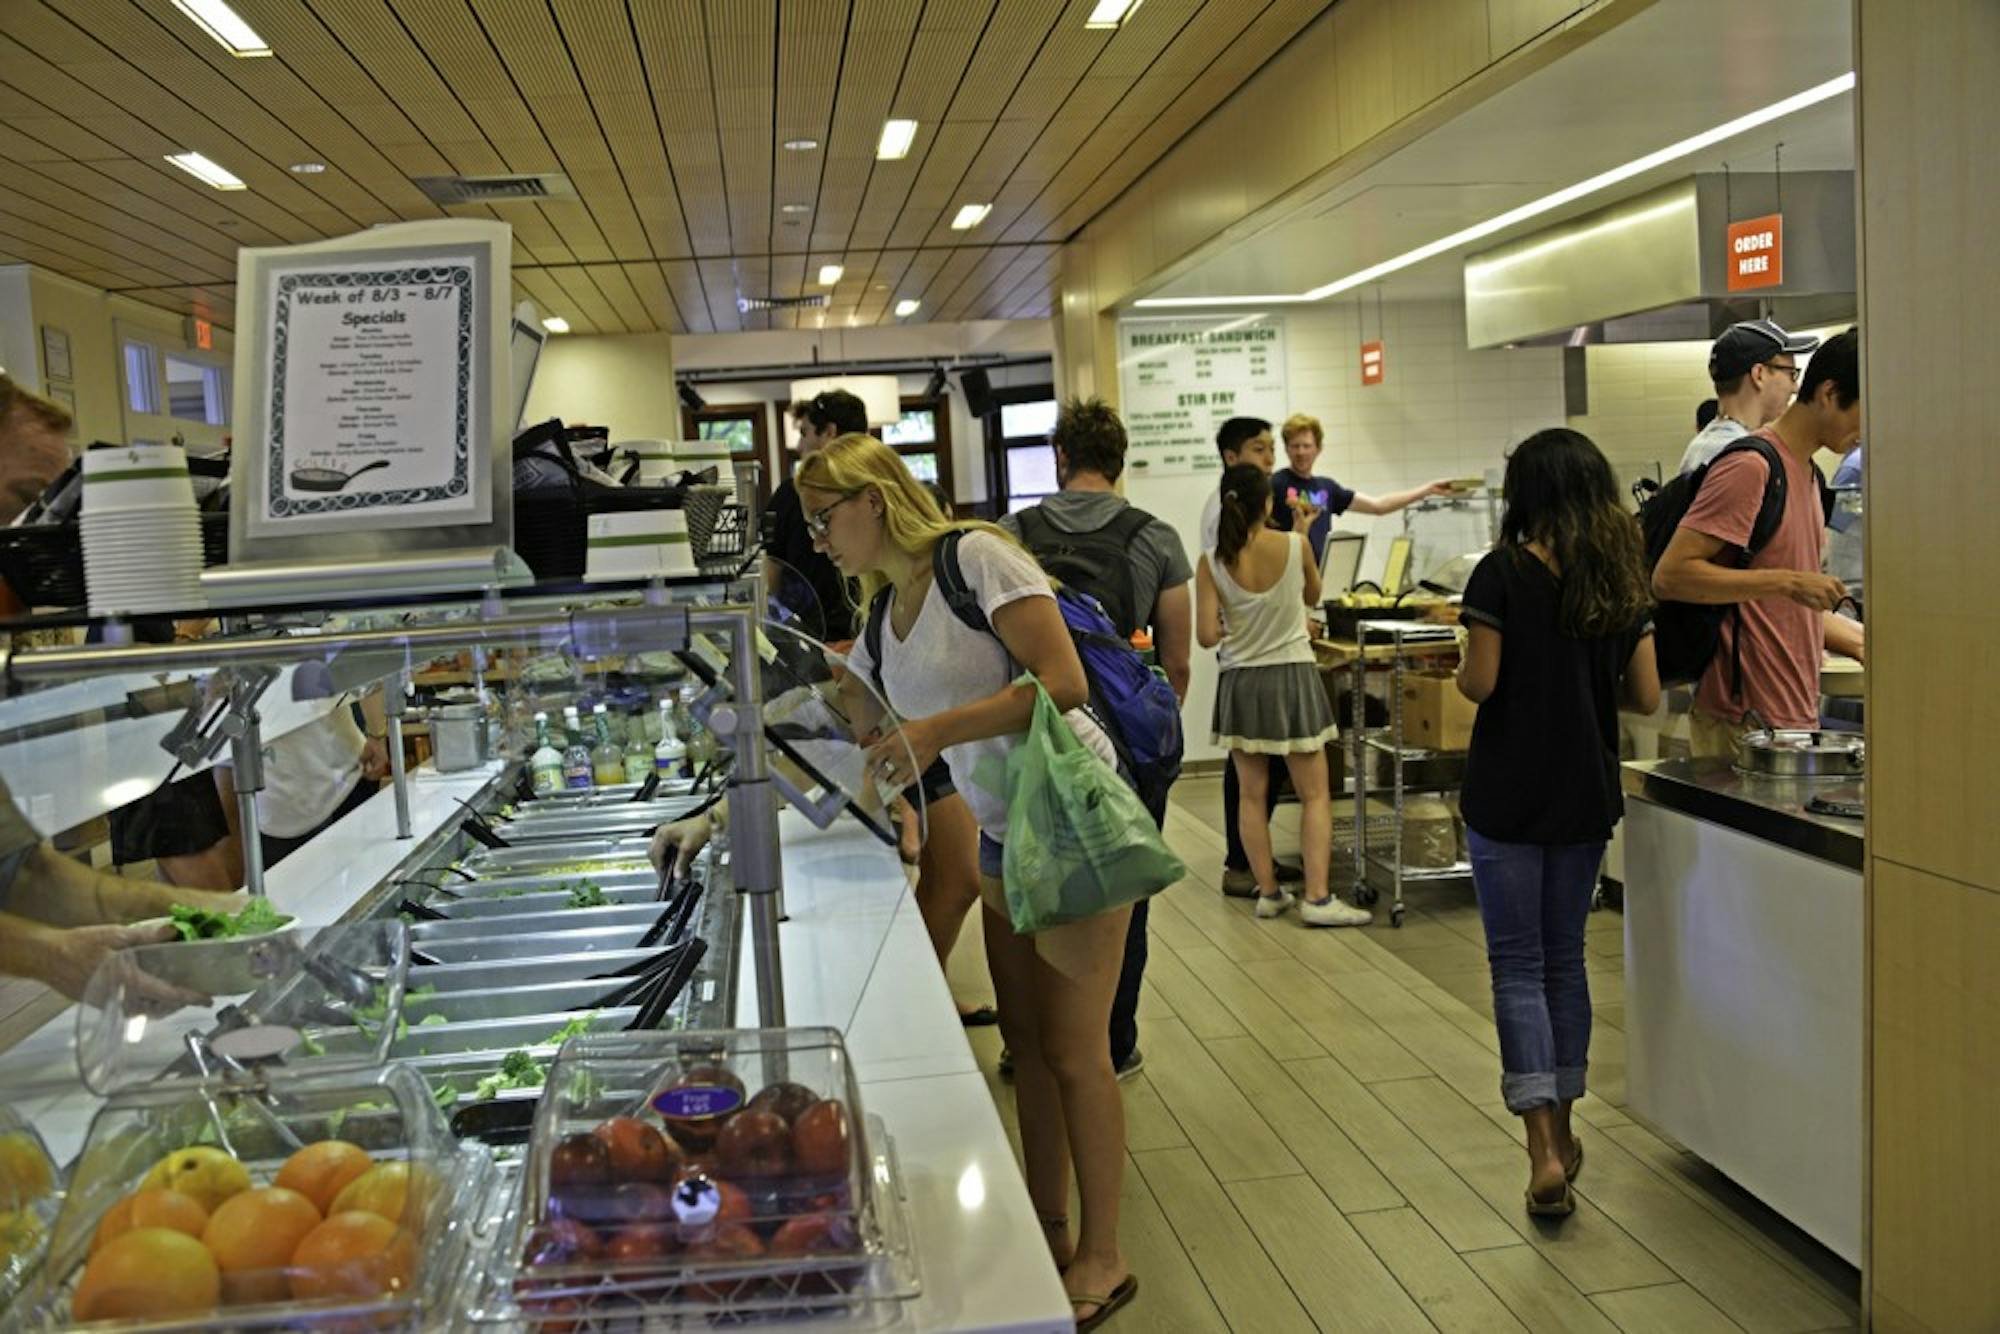 Collis Cafe offers students a la carte dining options, including smoothies, pasta and stir-fry.